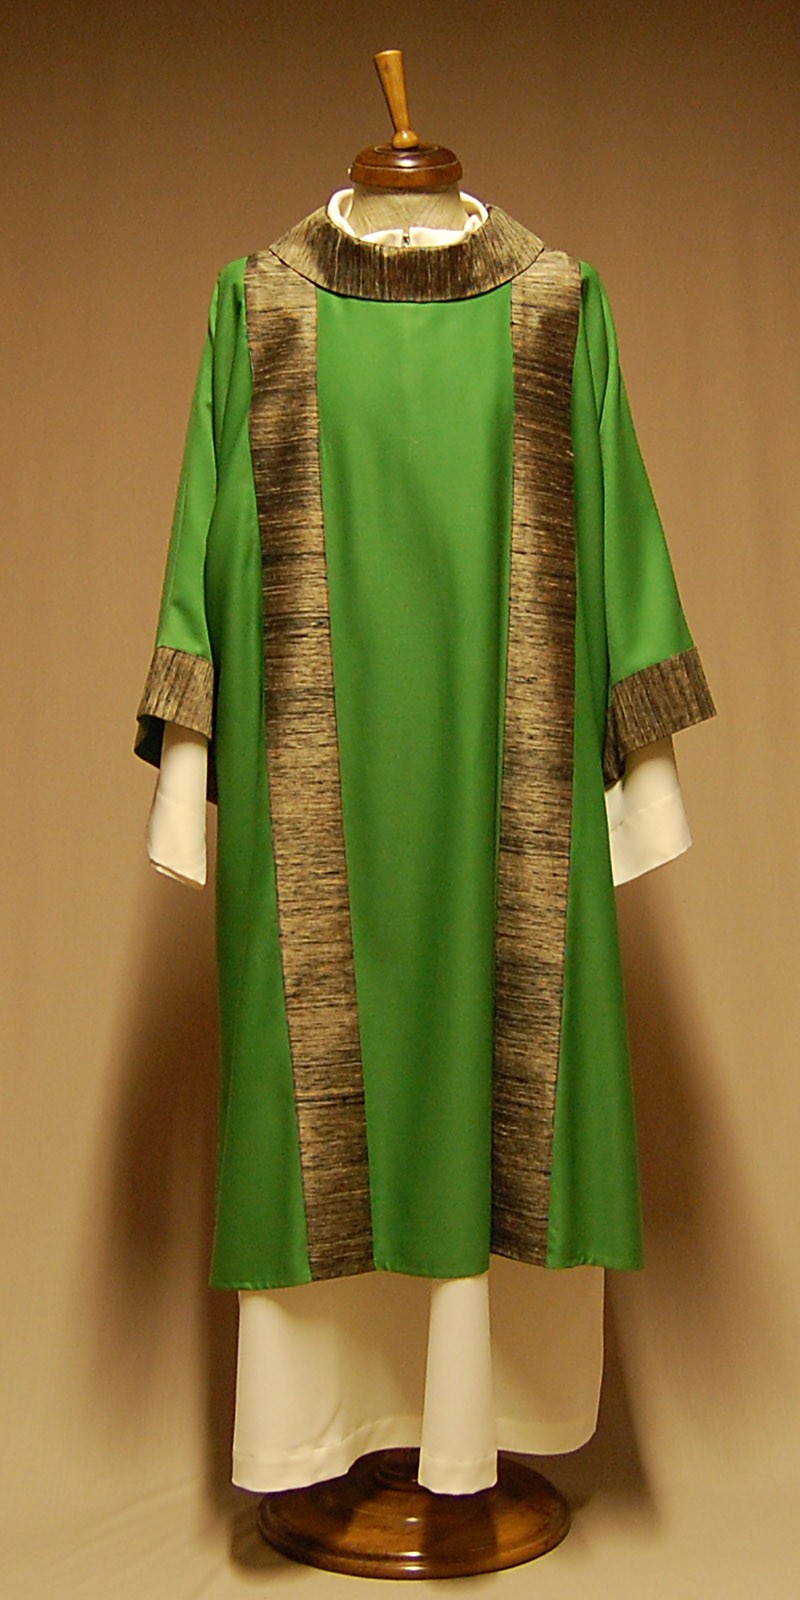 Dalmatic with inserts